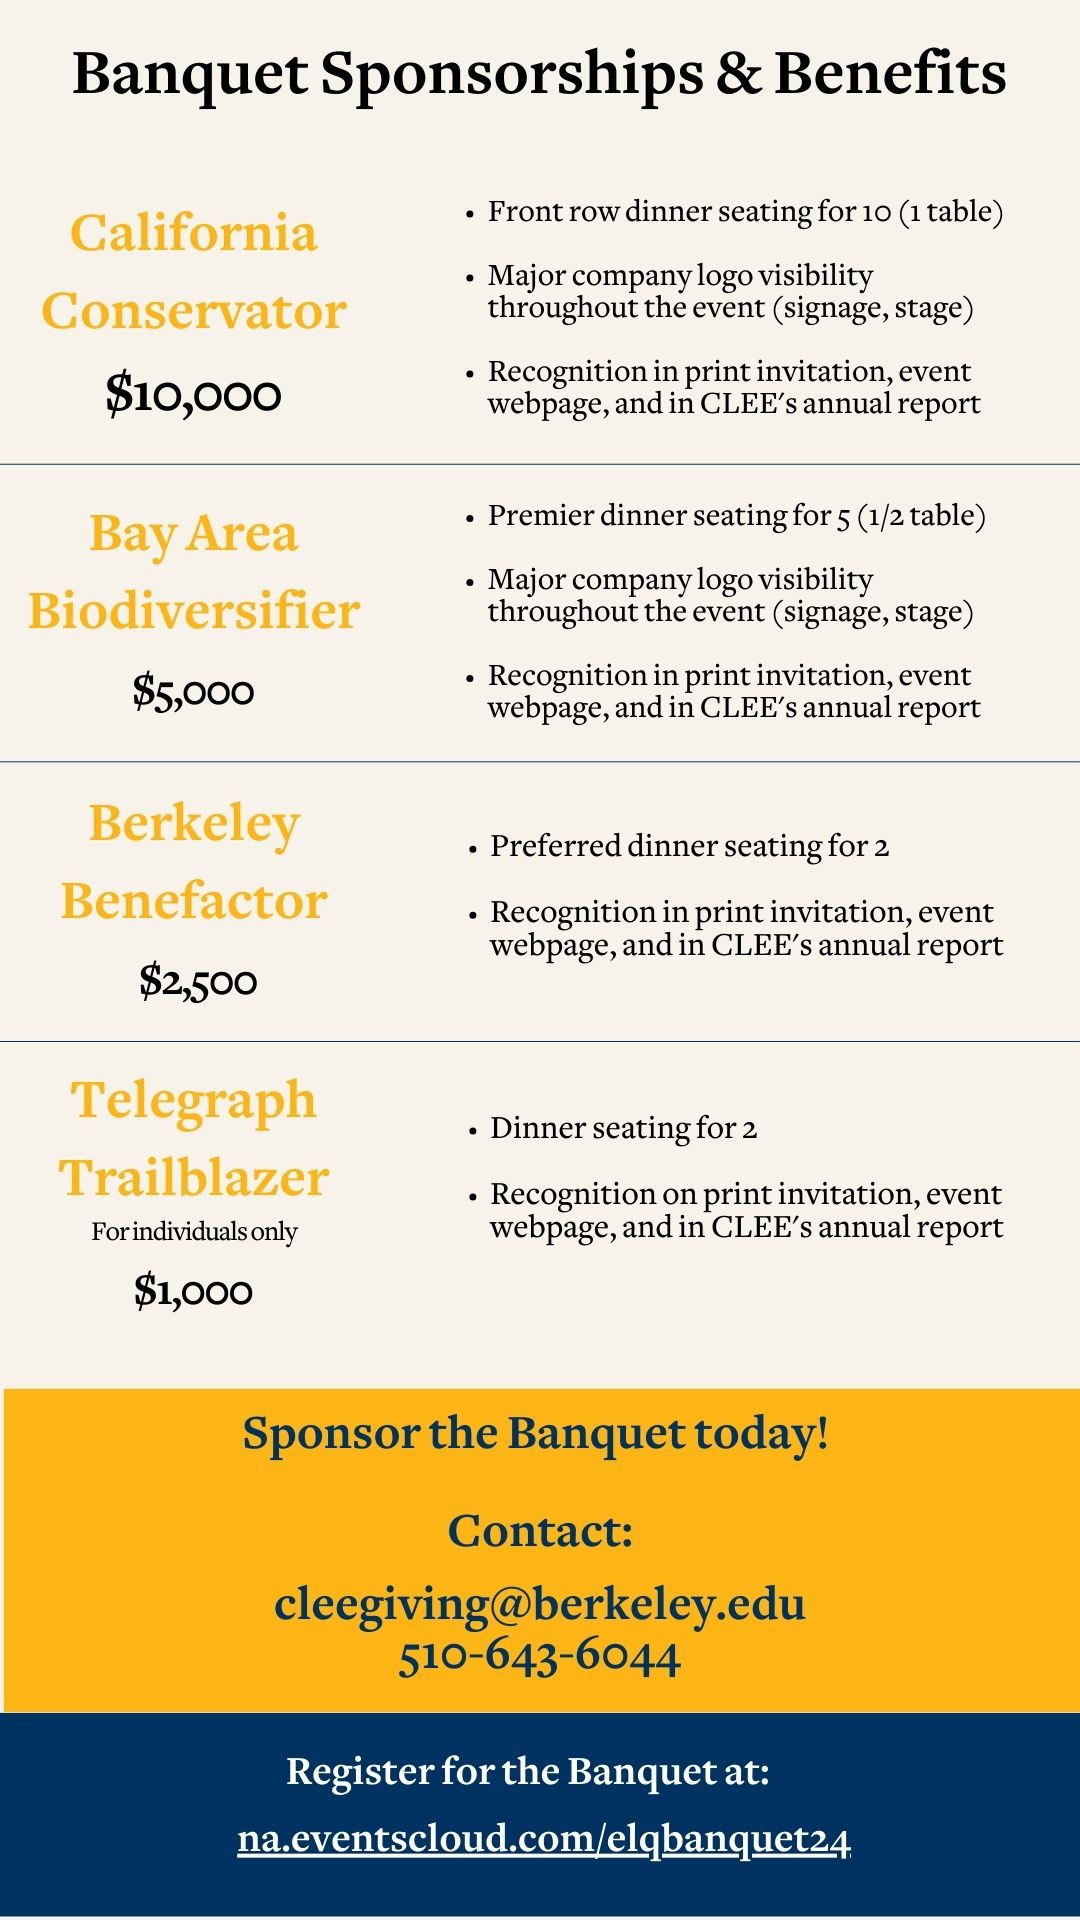 Banquet Sponsorships & Benefits. California Conservator $10,000. Front row dinner seating for 10 (1 table). Major company logo visibility throughout the event (signage, stage). Recognition in print invitation, event webpage, and in CLEE's annual report. Bay Area Biodiversifier, $5,000. Premier dinner searing for 5 (1/2 table). Major company logo visibility throughout the event (signage, stage). Recognition in print invitation, event webpage, and in CLEE's annual report. Berkeley Benefactor, $2,500. Preferred dinner seating for 2. Recognition in print invitation, event webpage, and in CLEE's annual report. Telegraph Trailblazer, for individuals only. $1,000. Dinner seating for 2. Recognition on print invitations, event webpage, and in CLEE's annual report. Sponsor the Banquet today! Contact: cleegiving@berkeley.edu. Register for the Banquet at: na.eventscloud.com/elqbanquet24